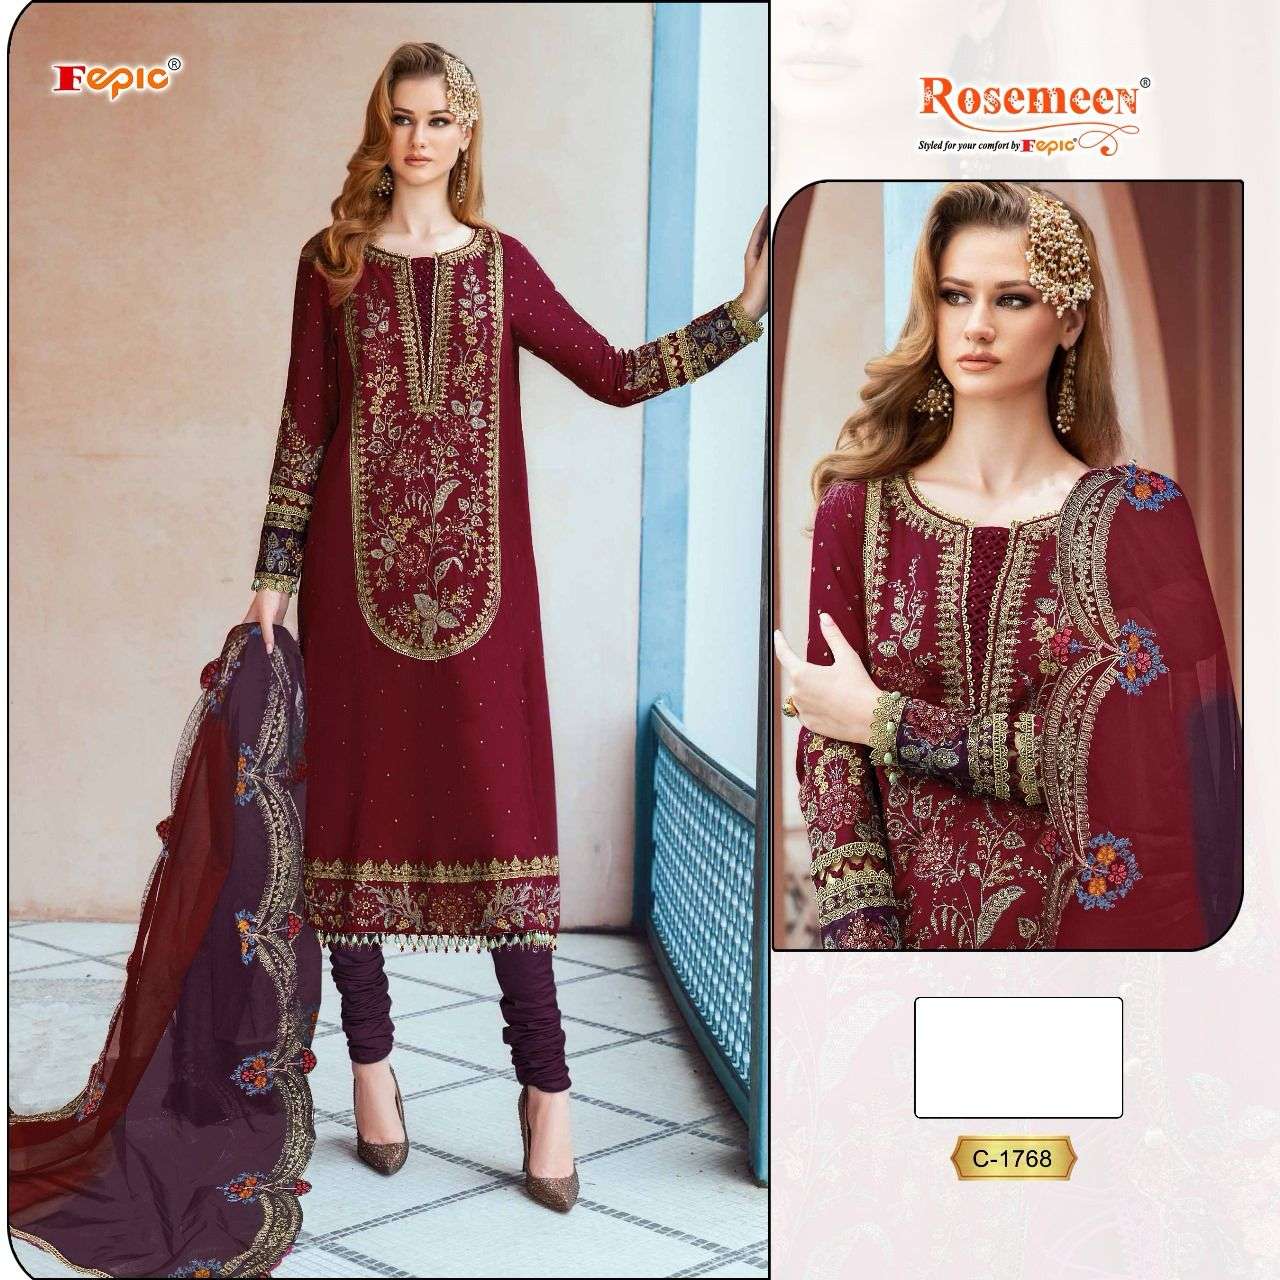 ROSEMEEN C-1768 BY FEPIC DESIGNER ORGANZA EMBROIDERY PAKISTANI DRESS